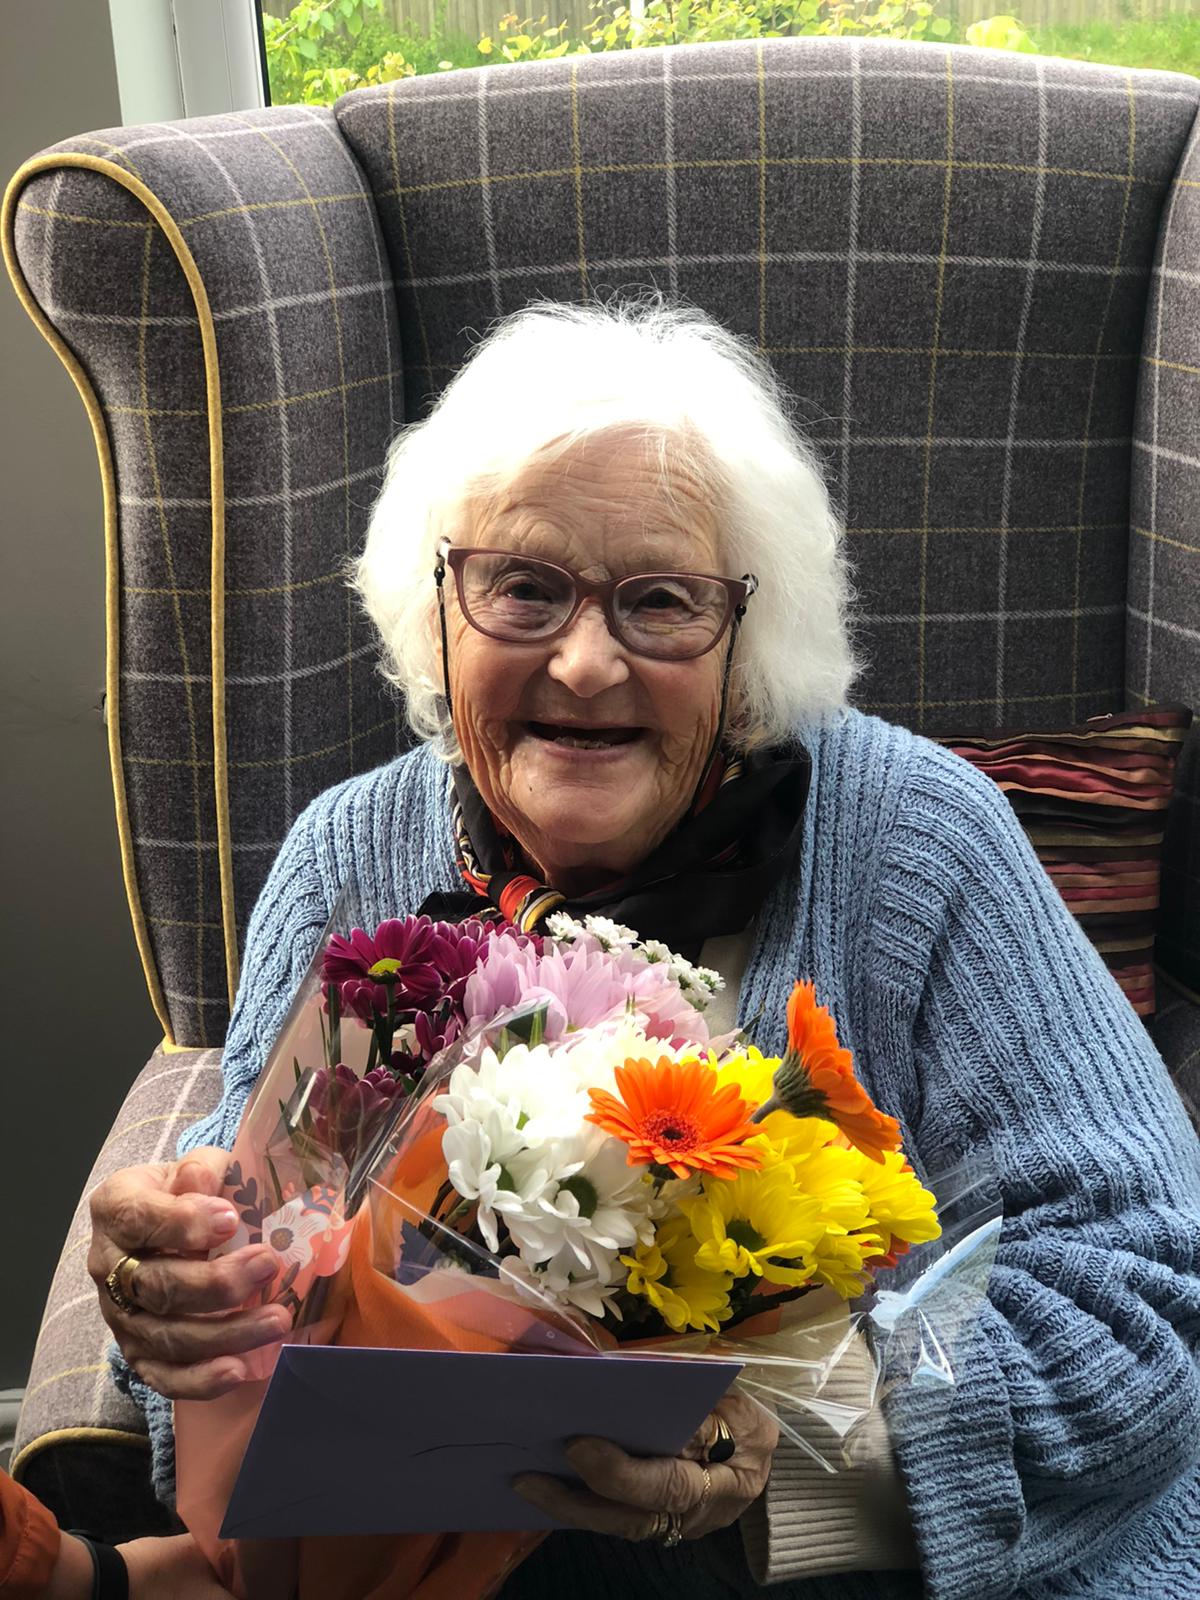 Margaret with her birthday flowers